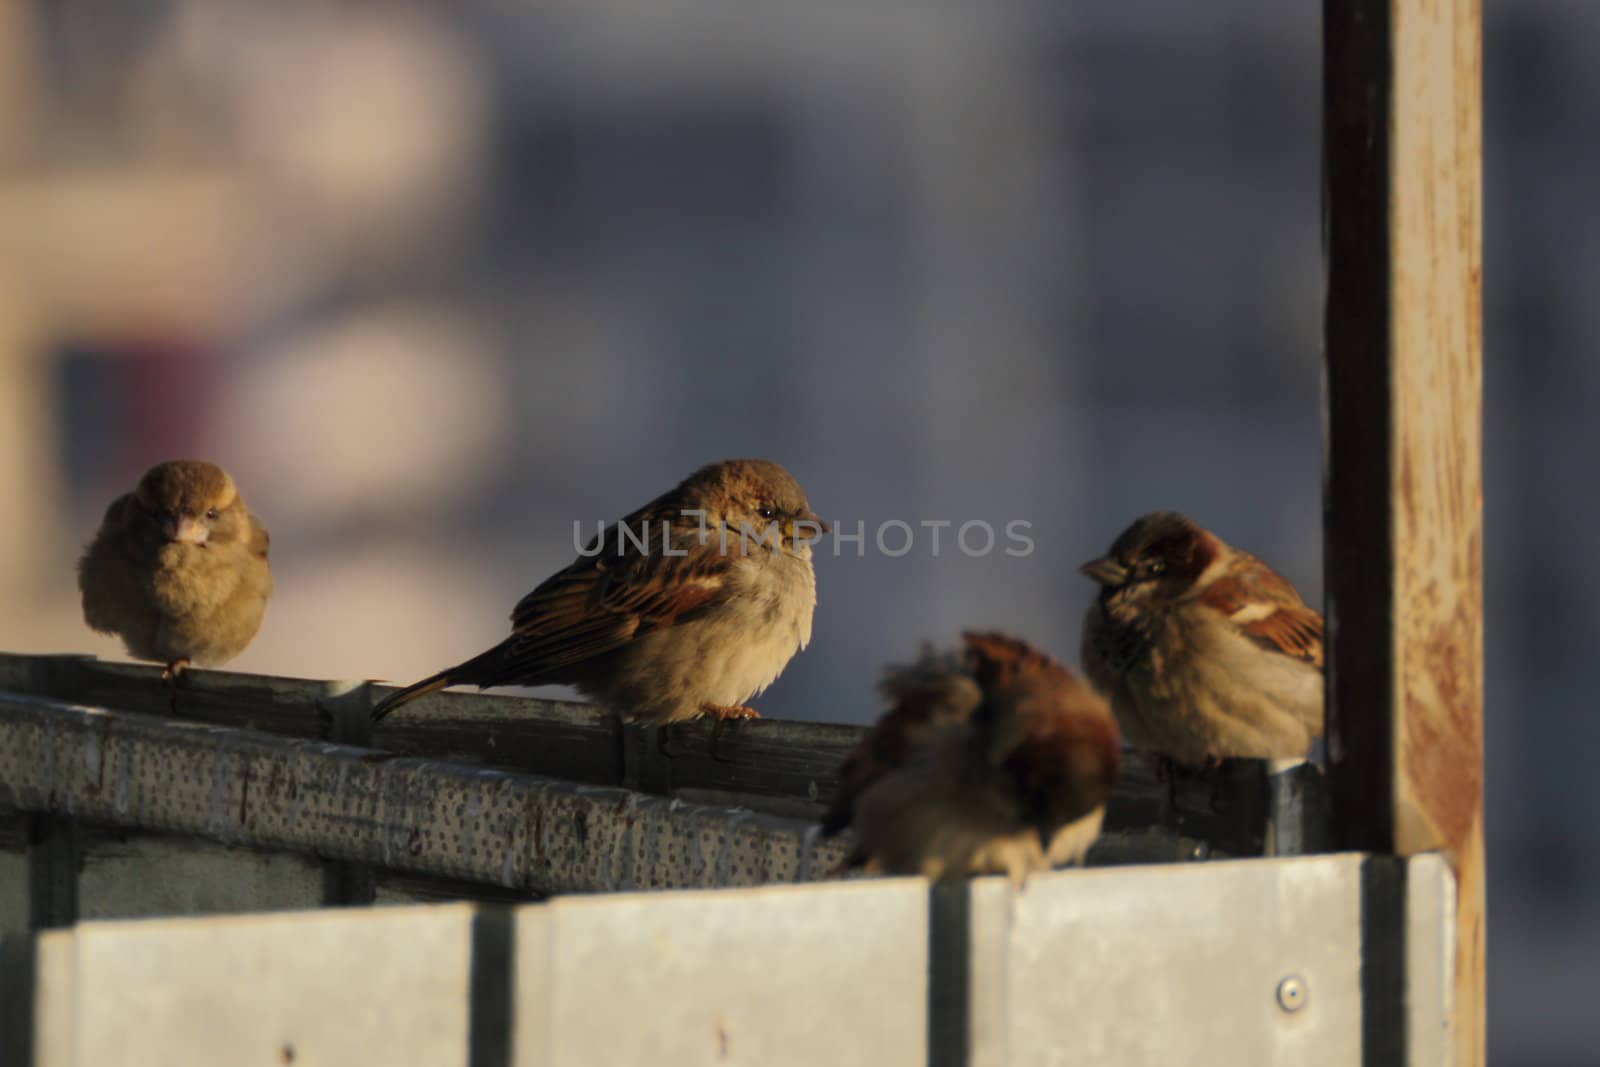 these tiny sparrows sit all day long near the garbage